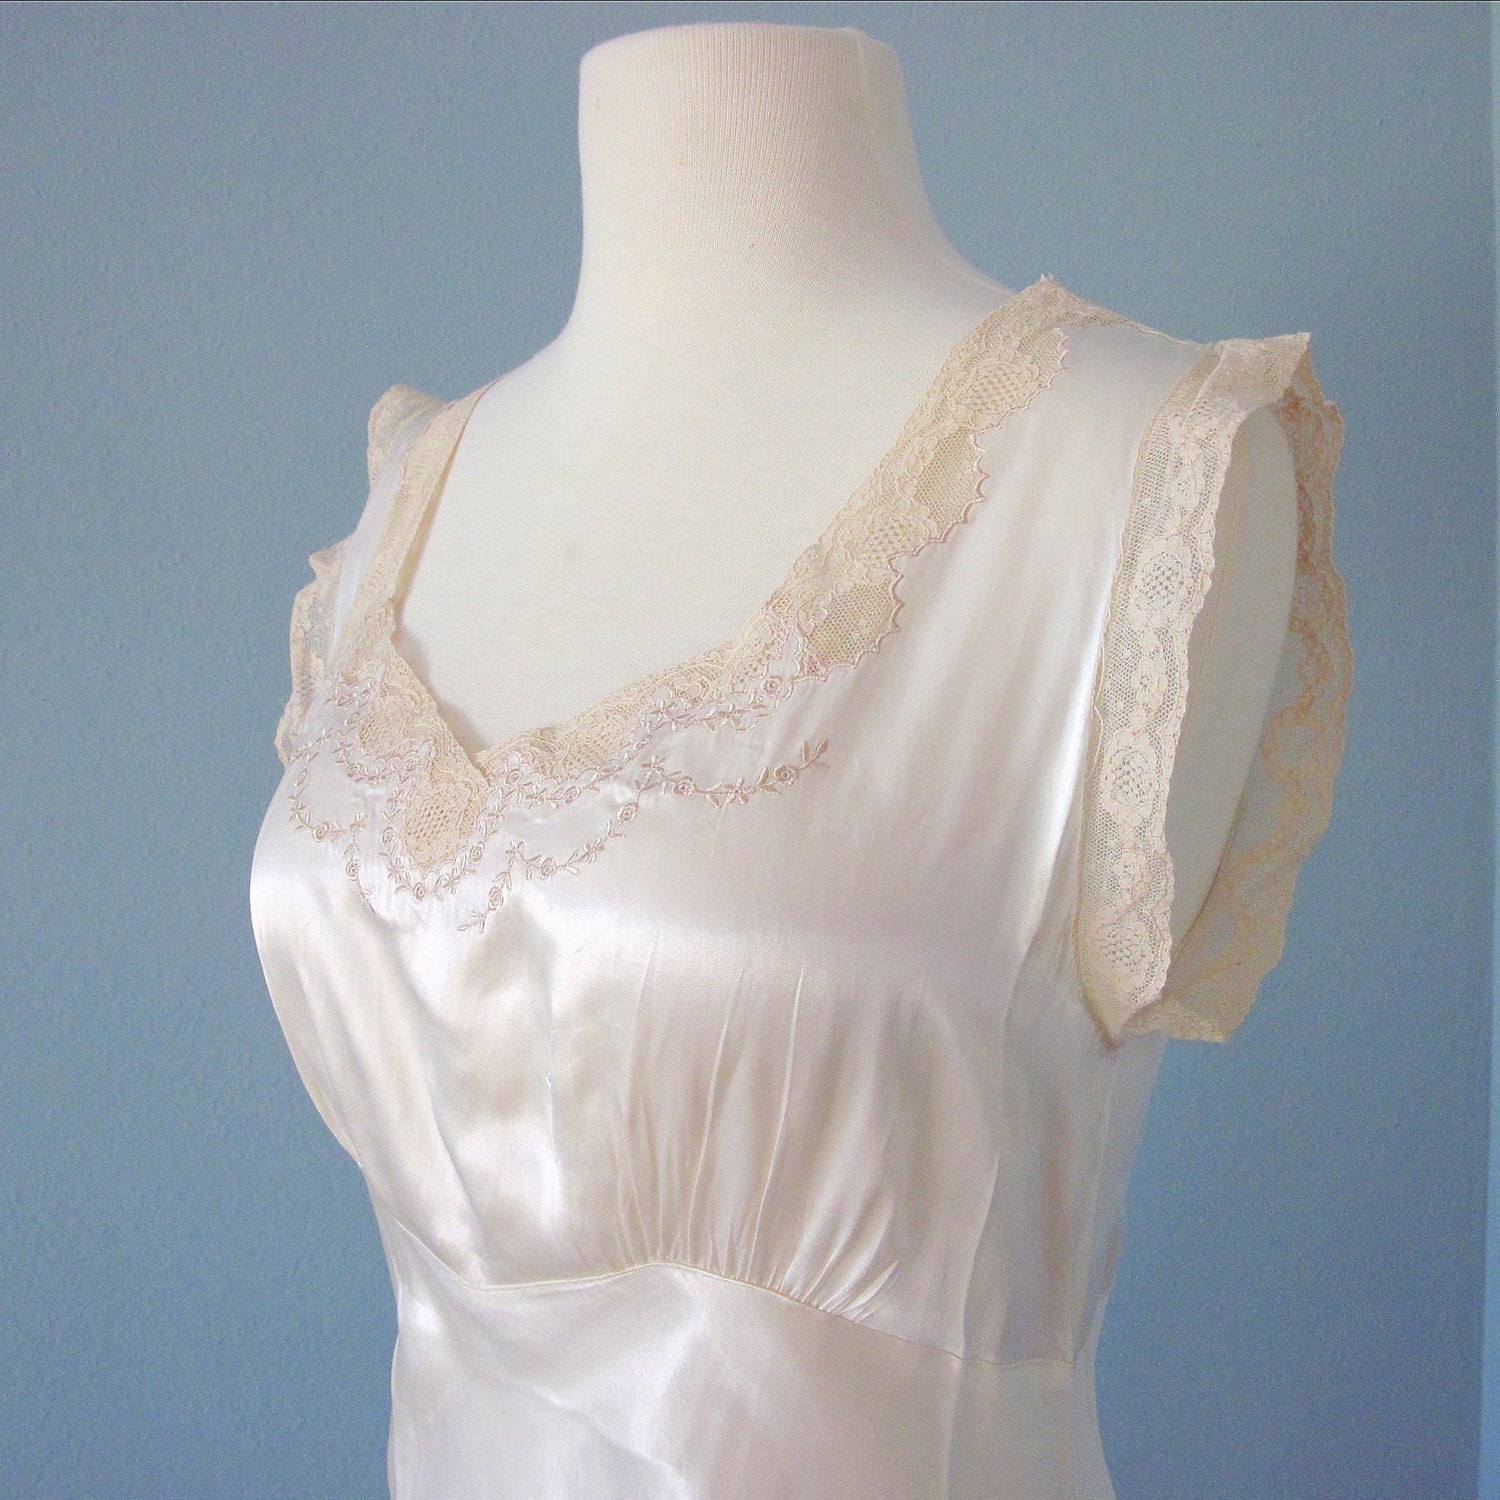 Vintage 1940s Gowns...Miss Ritz Satin Nightgown with Lace Trim